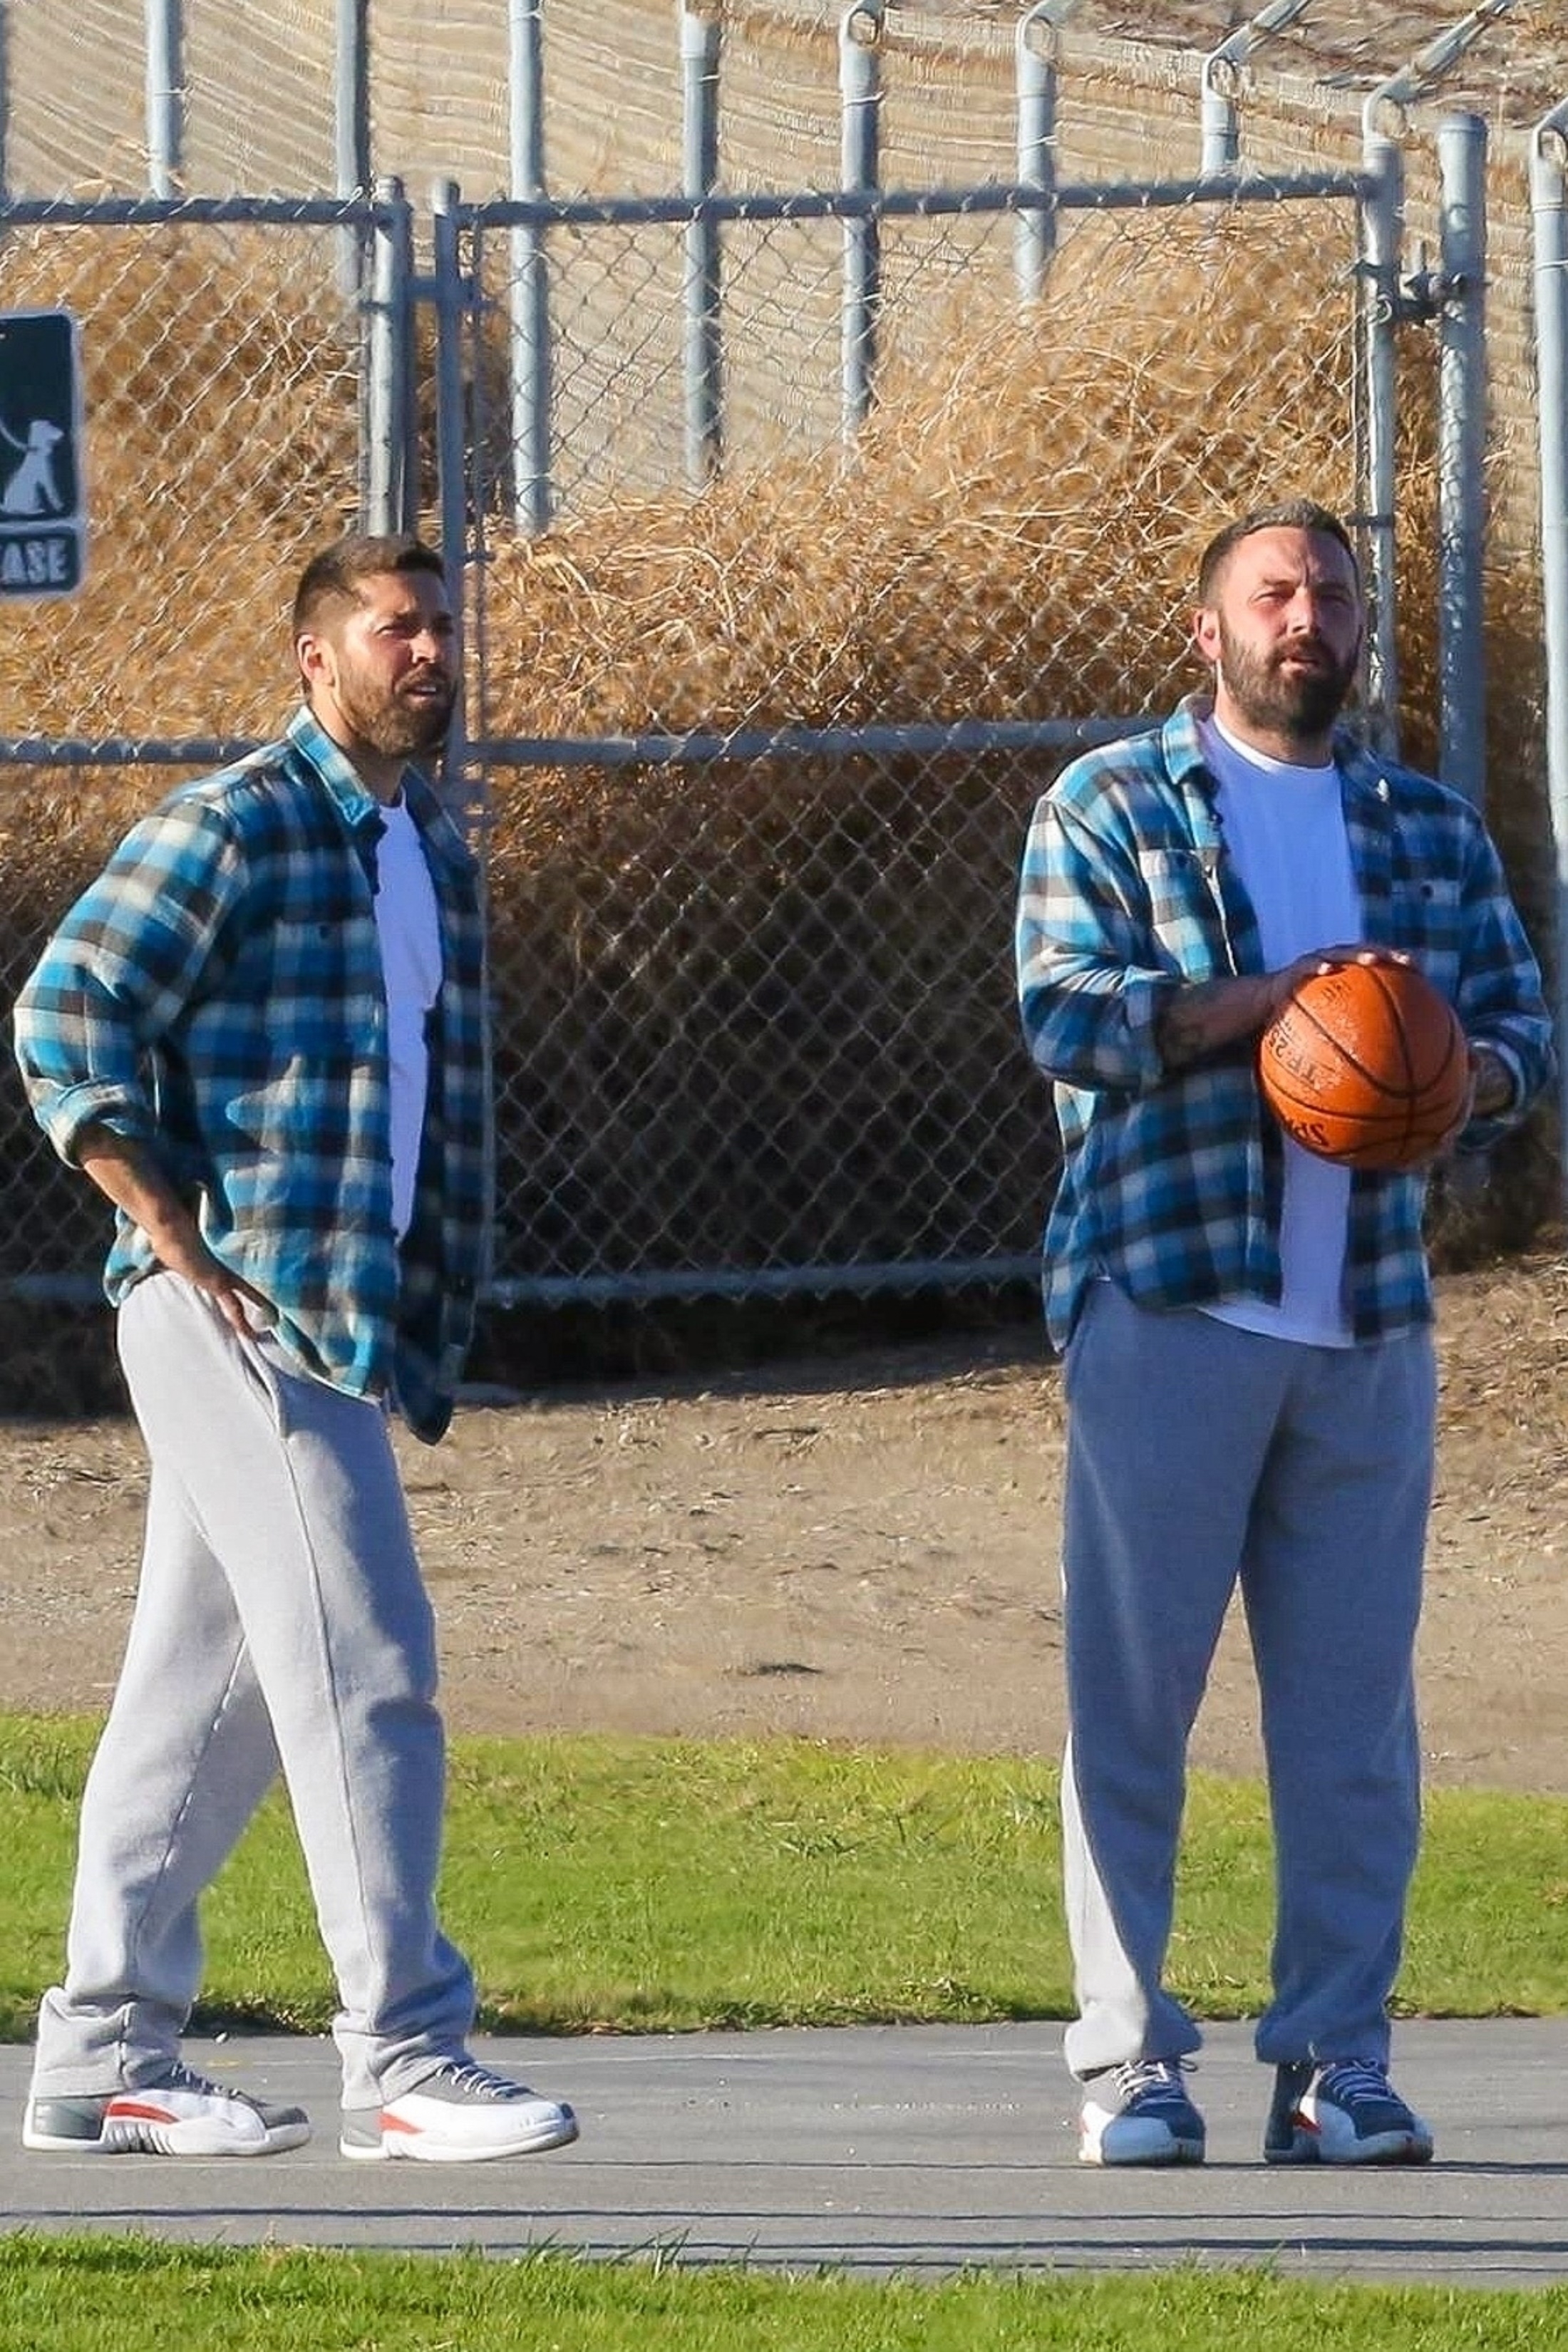 Two men standing on a basketball court, one holding a ball, dressed in casual attire